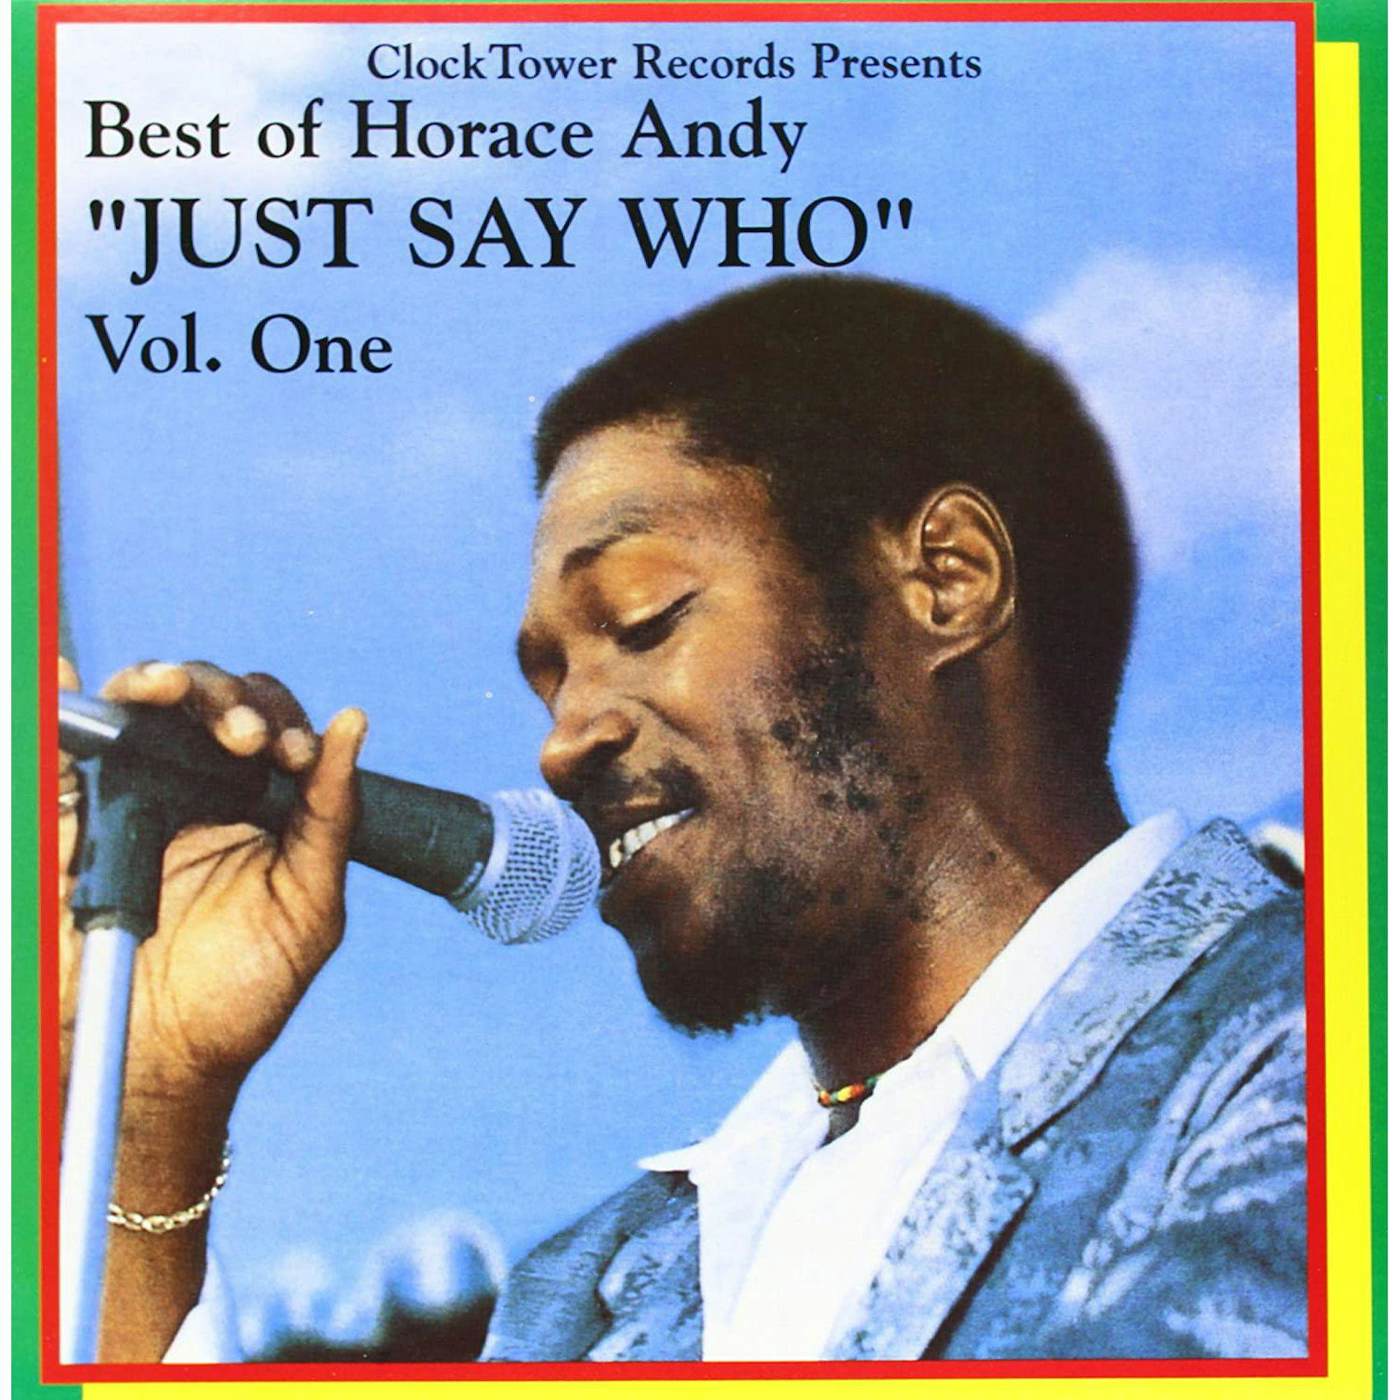 BEST OF HORACE ANDY 1: JUST SAY WHO Vinyl Record